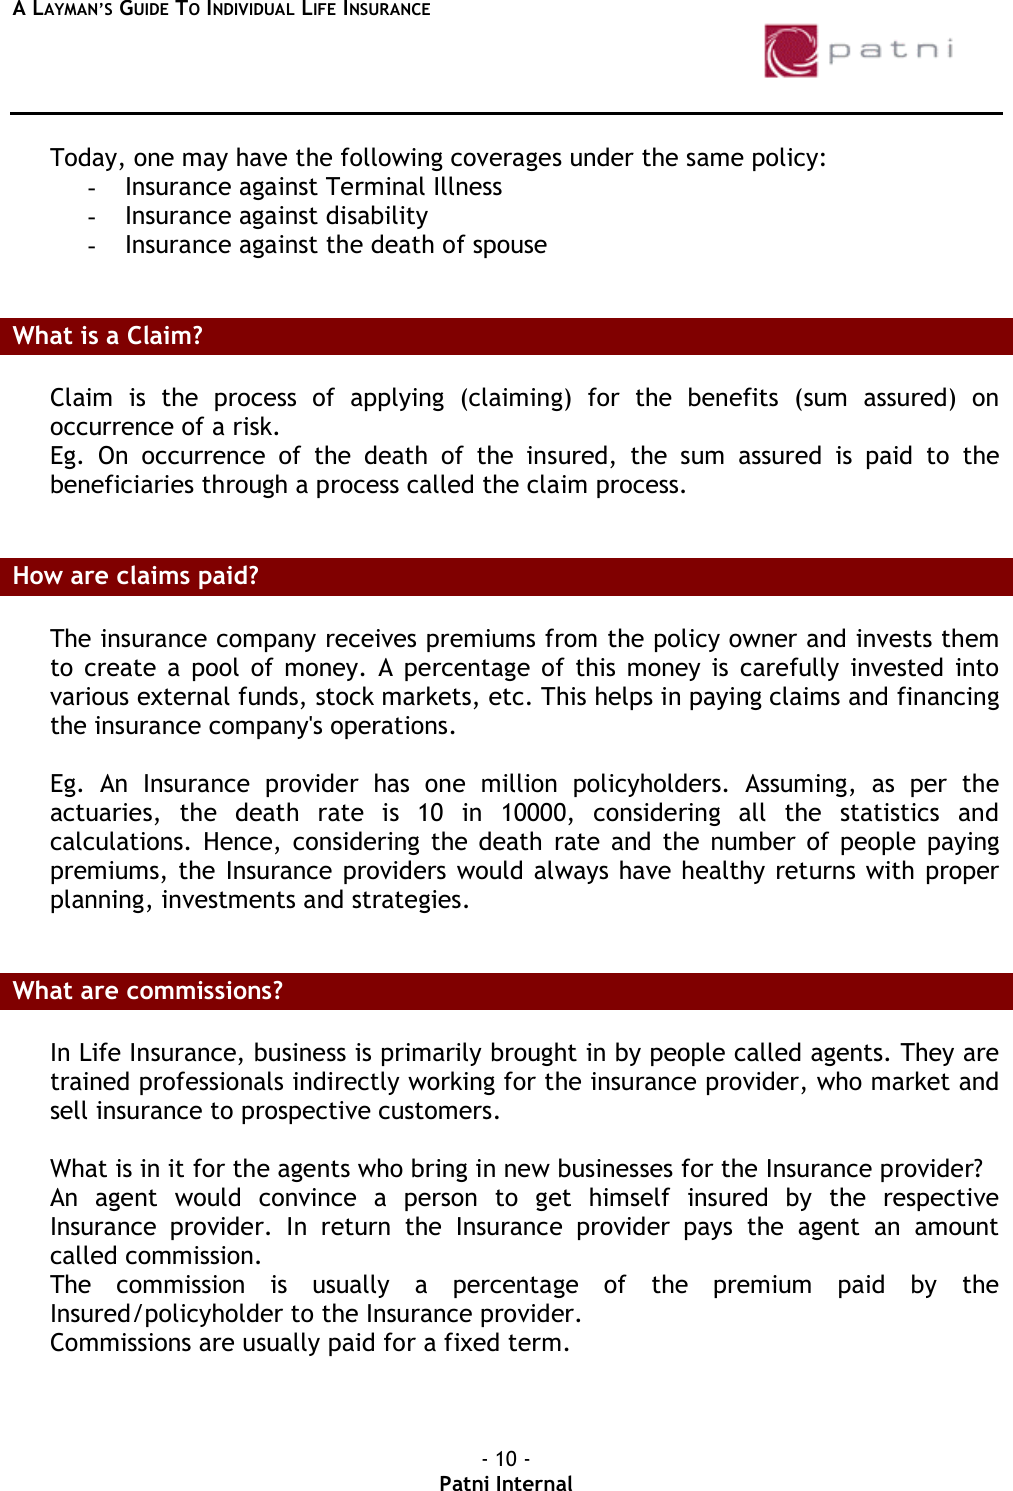 Page 10 of 11 - 45ADE867-21EA-28BEF3 A Laymans Guide To Individual Life-Insurance